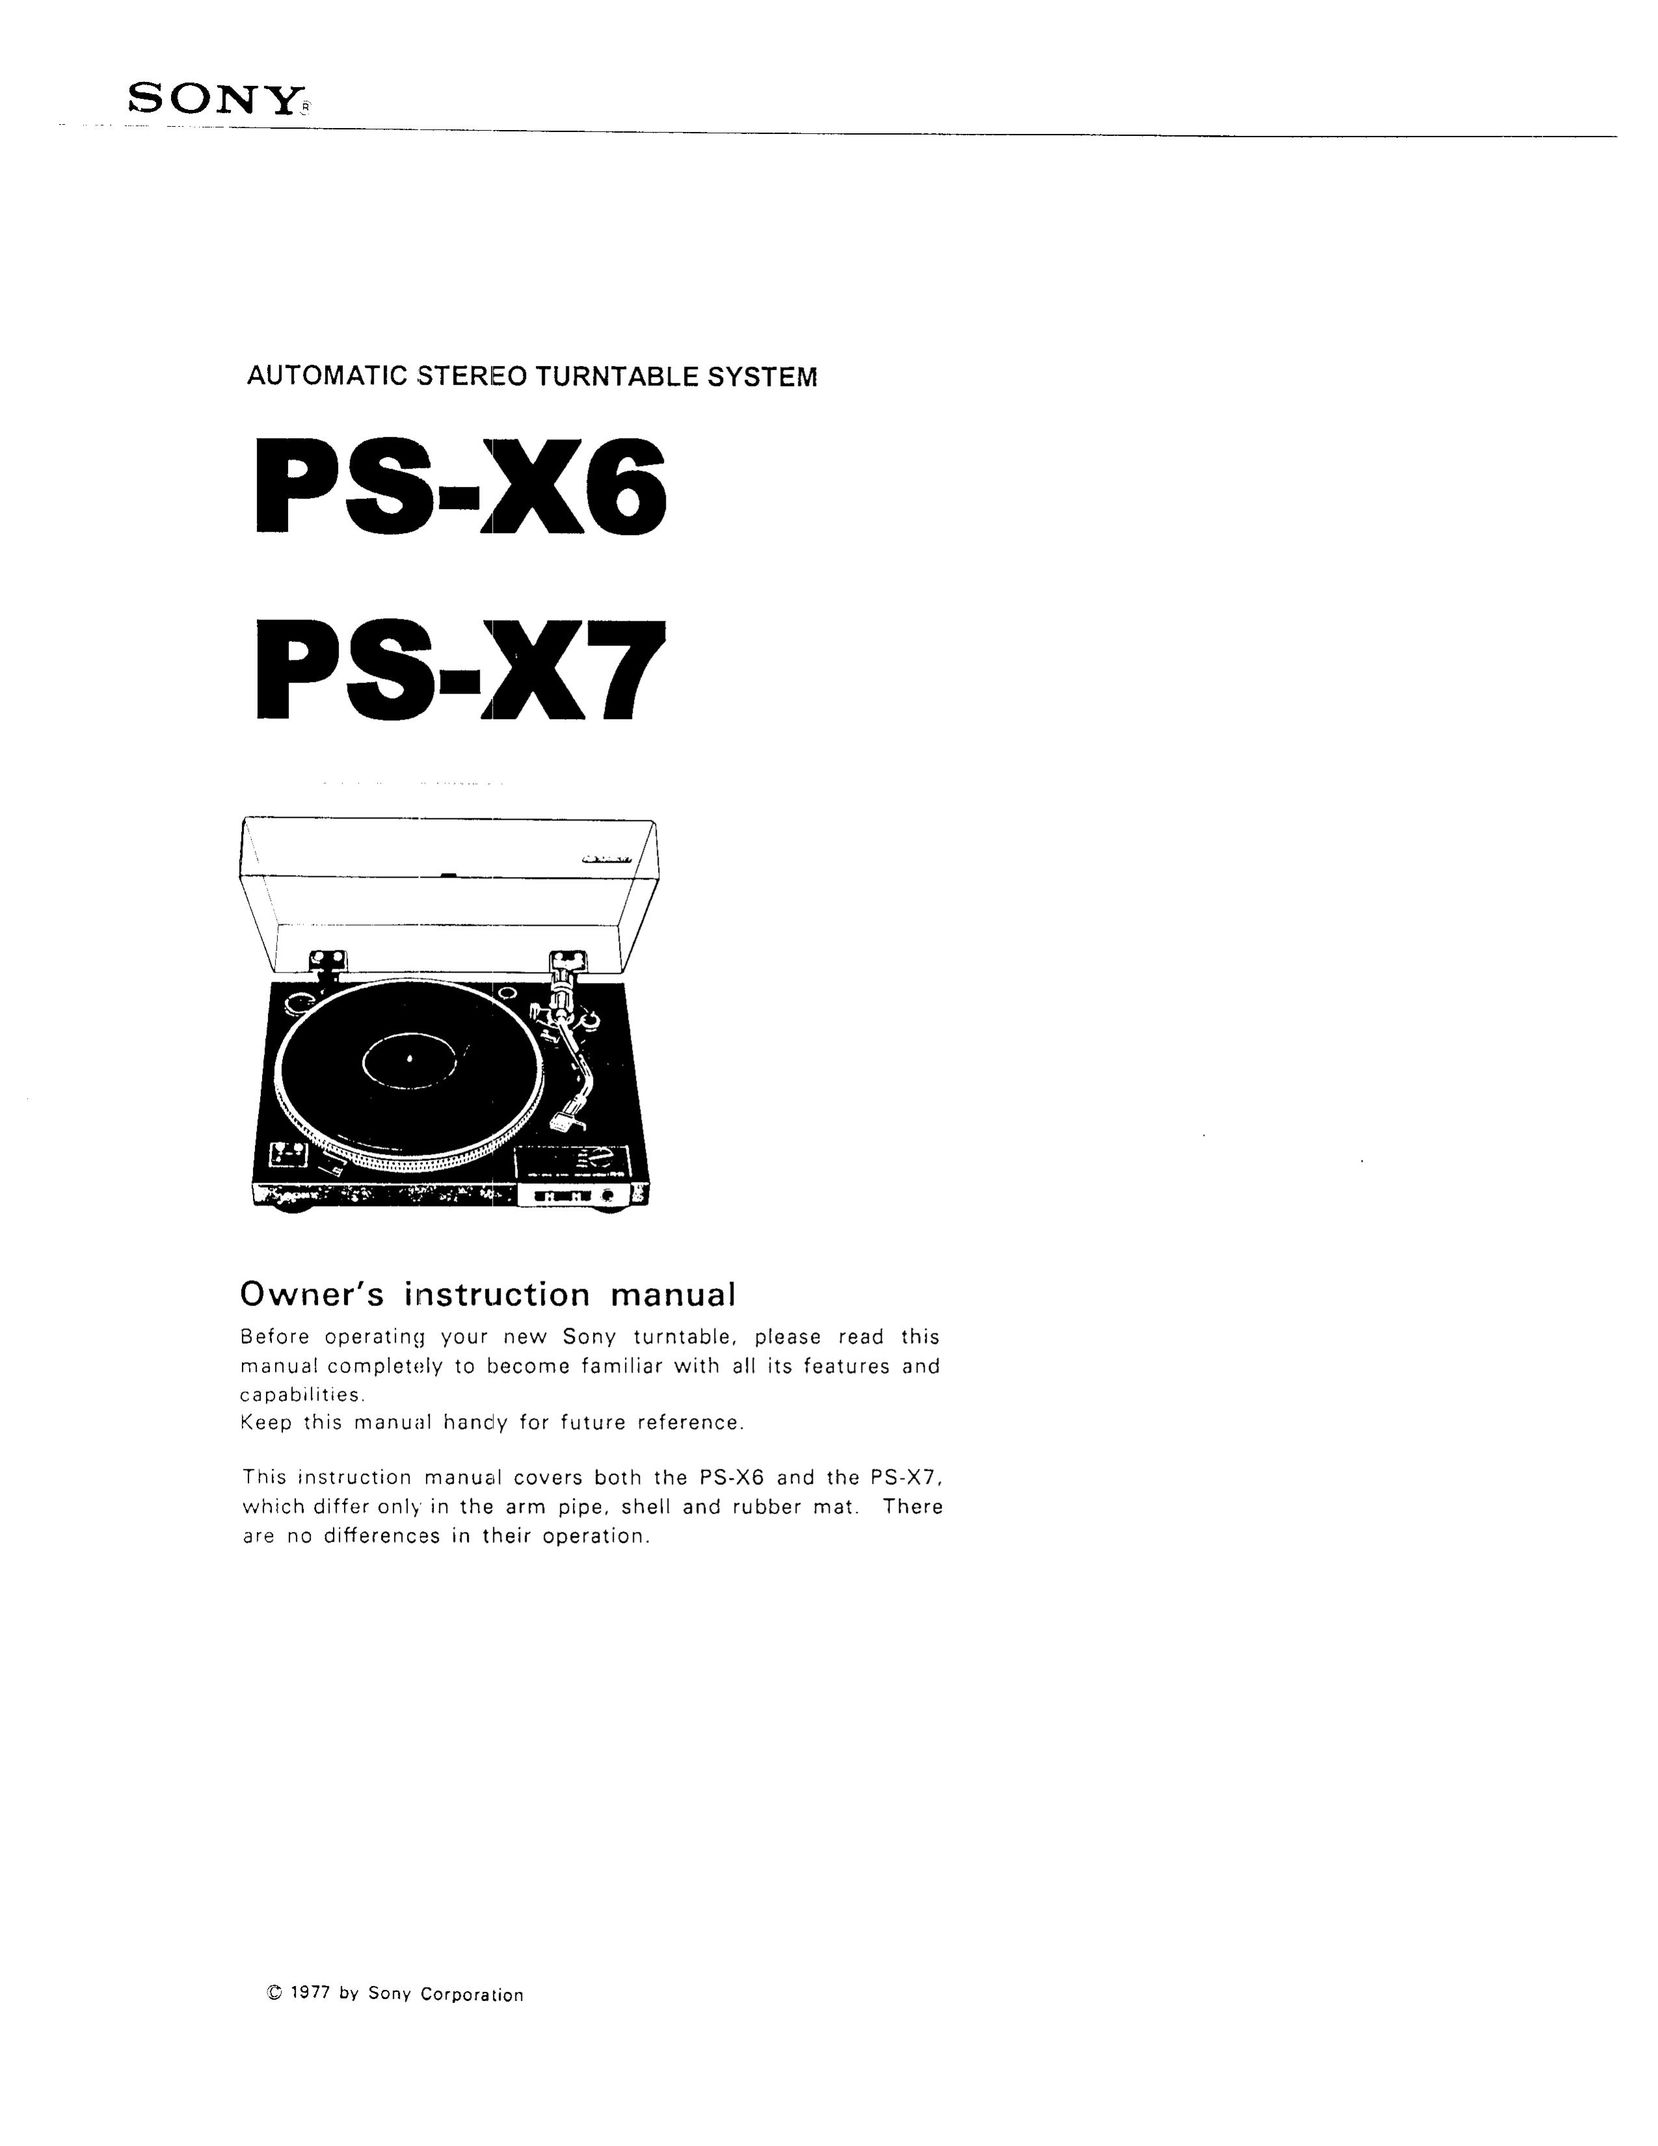 Sony PS-X6 Turntable User Manual